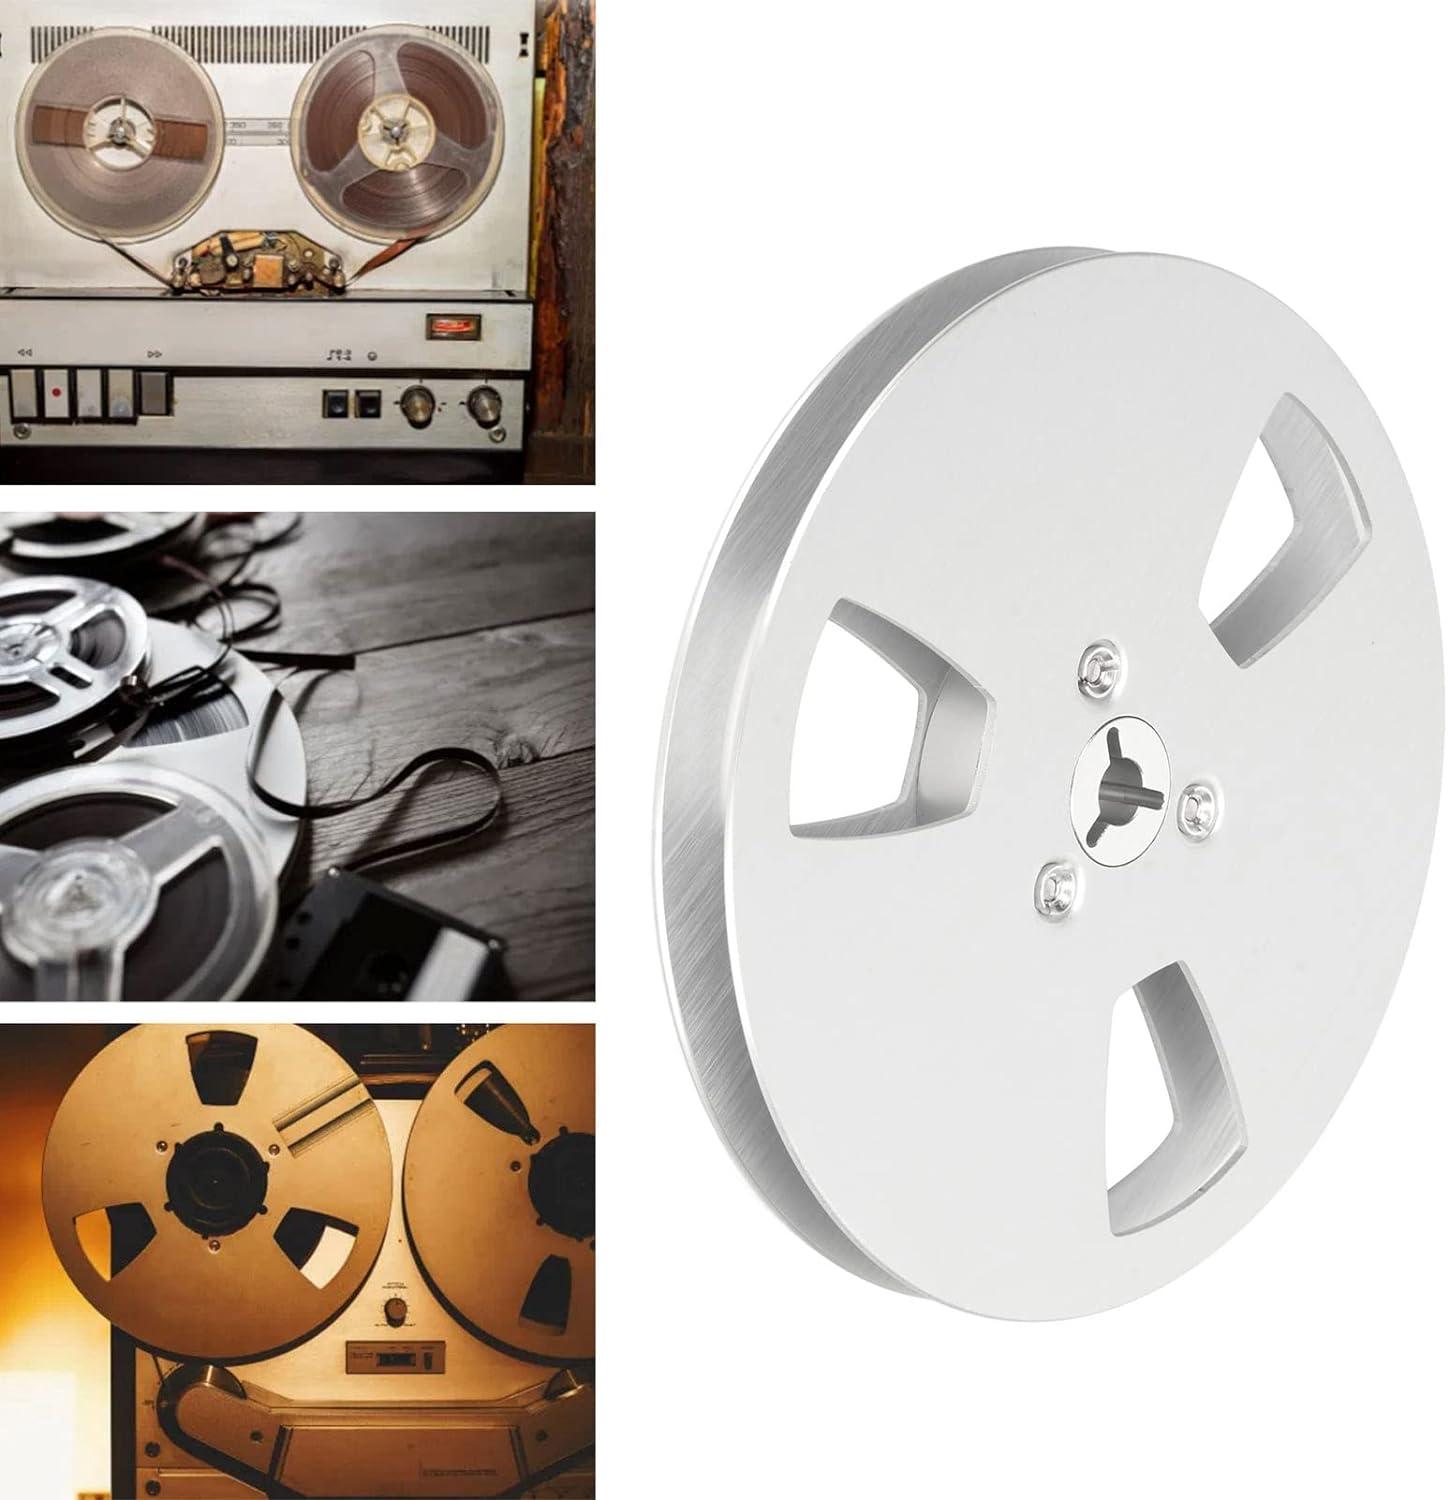 Empty Tape Reel, Universal 3 Holes 7 x 1/4 Aluminum Alloy Take Up Reel to  Reel Small Hub 3 Hole Wind Resistance Holes Open Reel Sound Tape Empty Reel